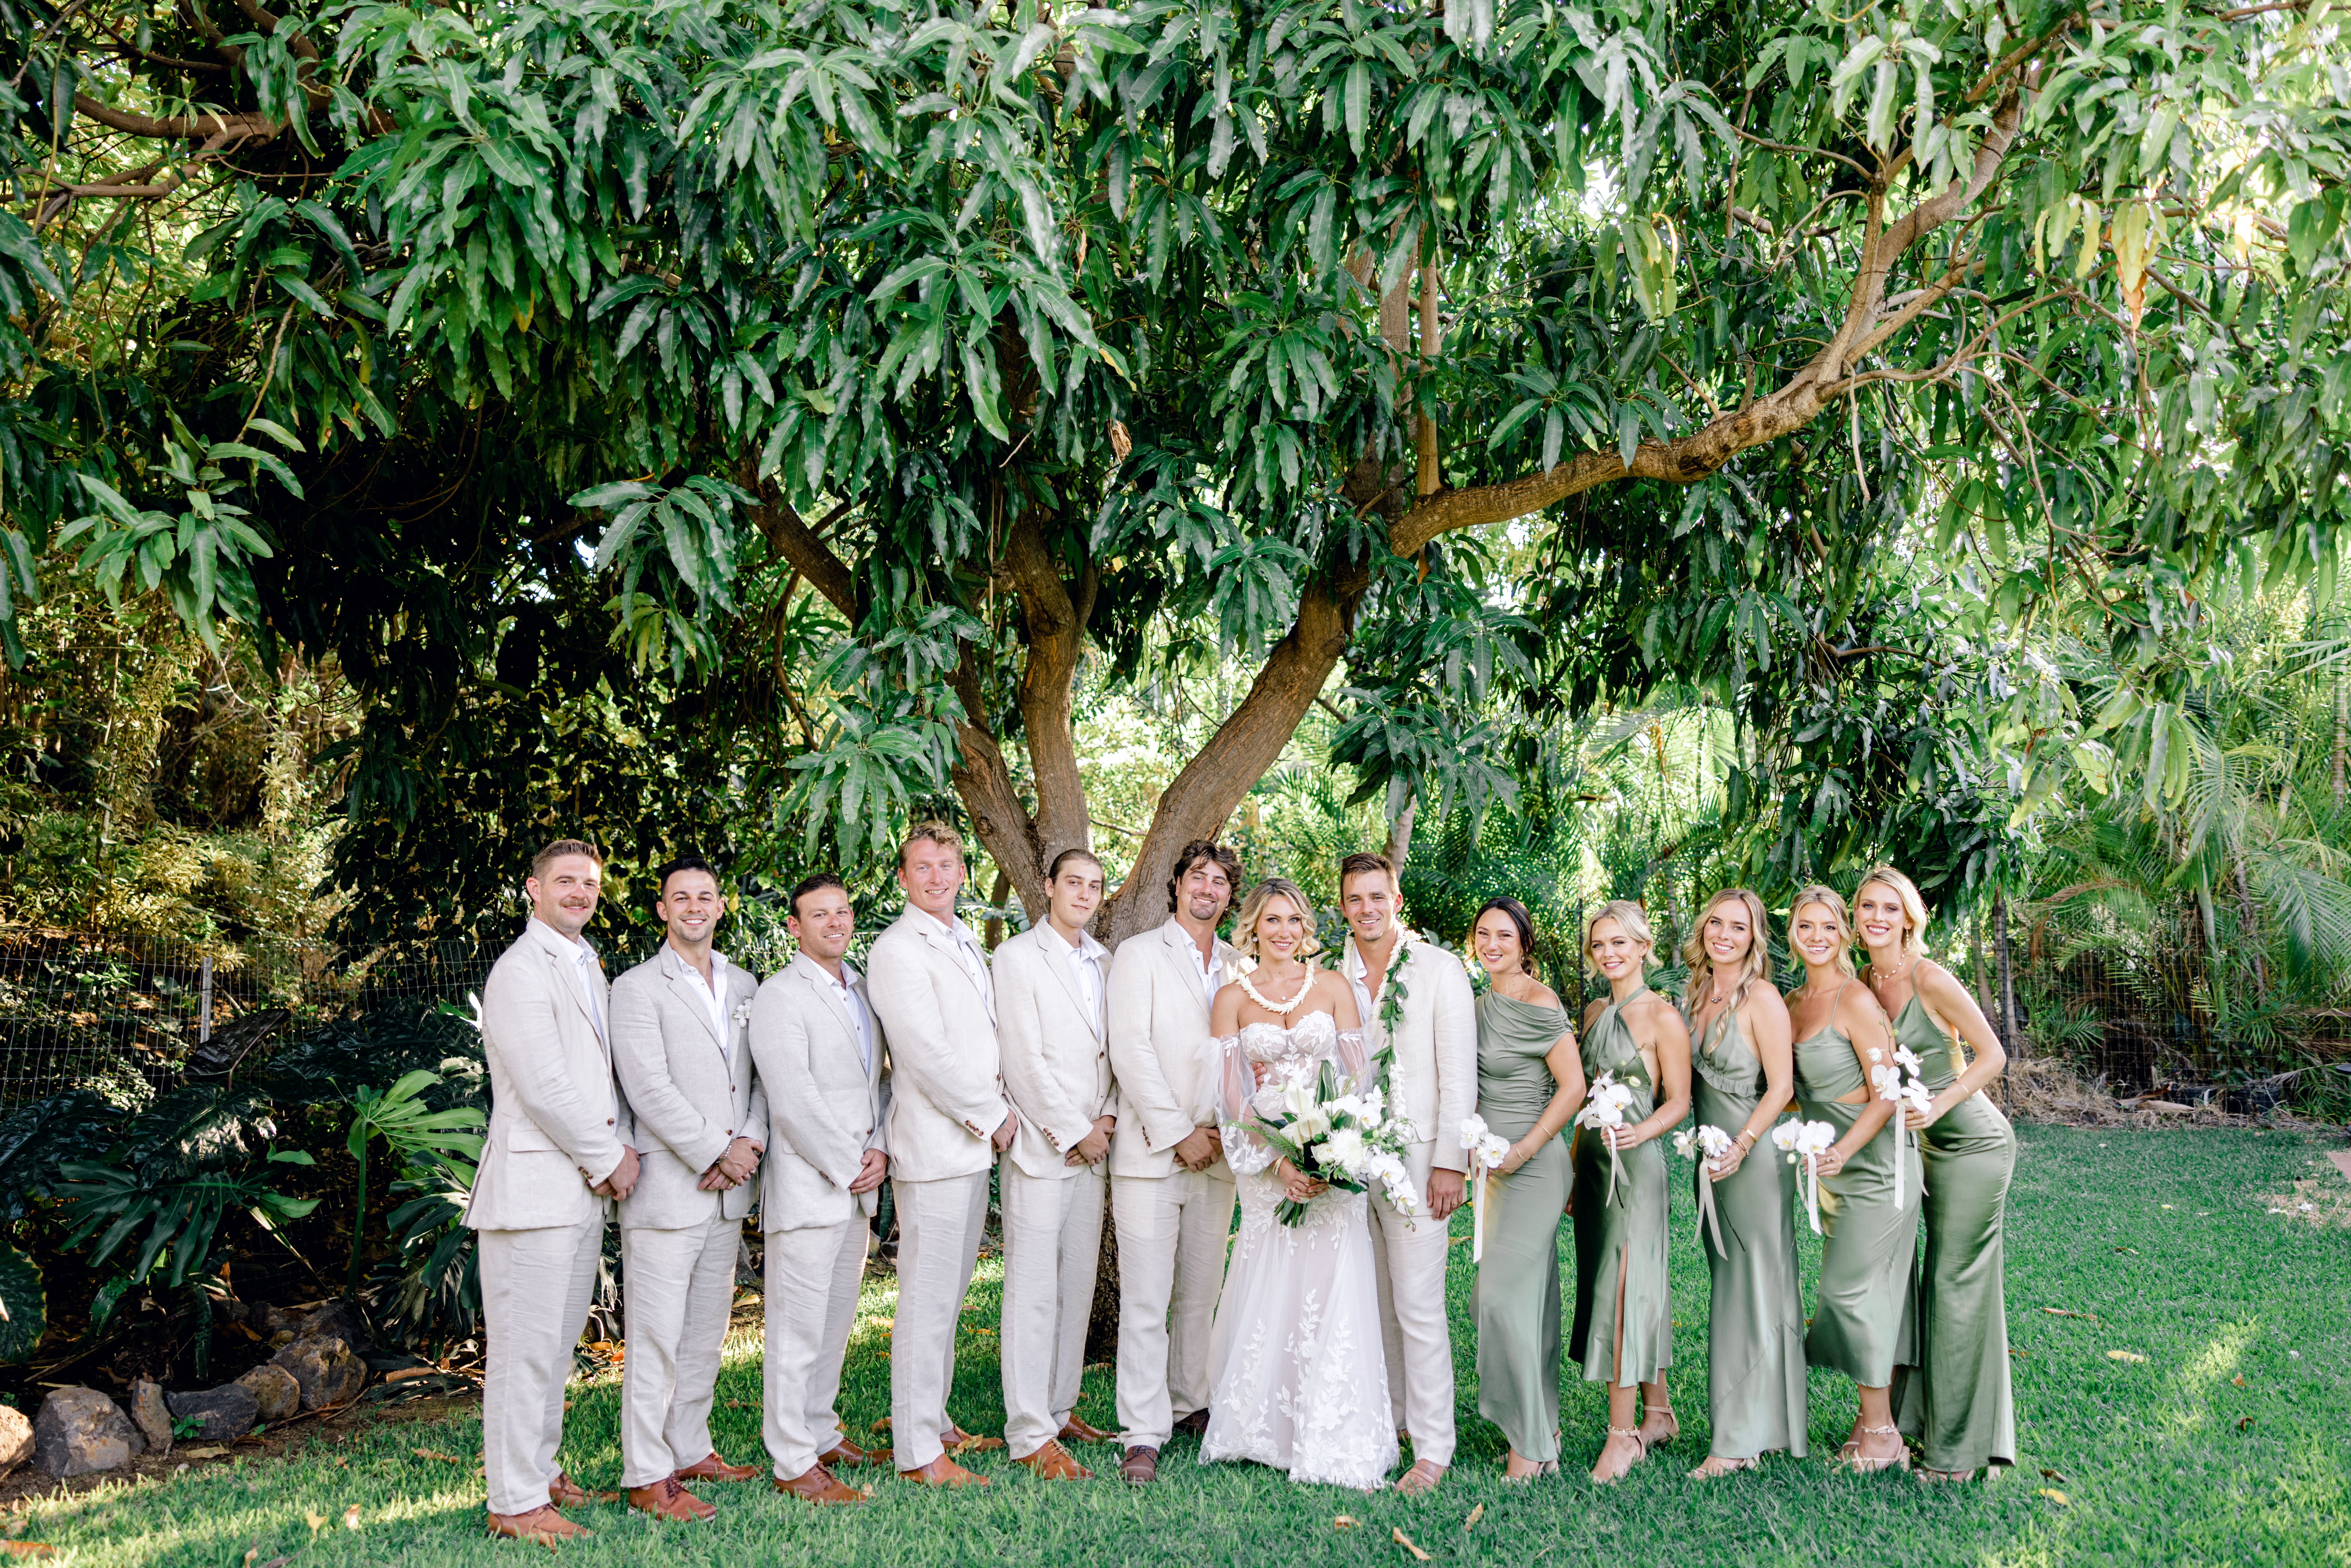 Woman wearing a wedding dress holding flowers and man wearing linen outfit standing beside their wedding party at wedding venue in south Kihei.